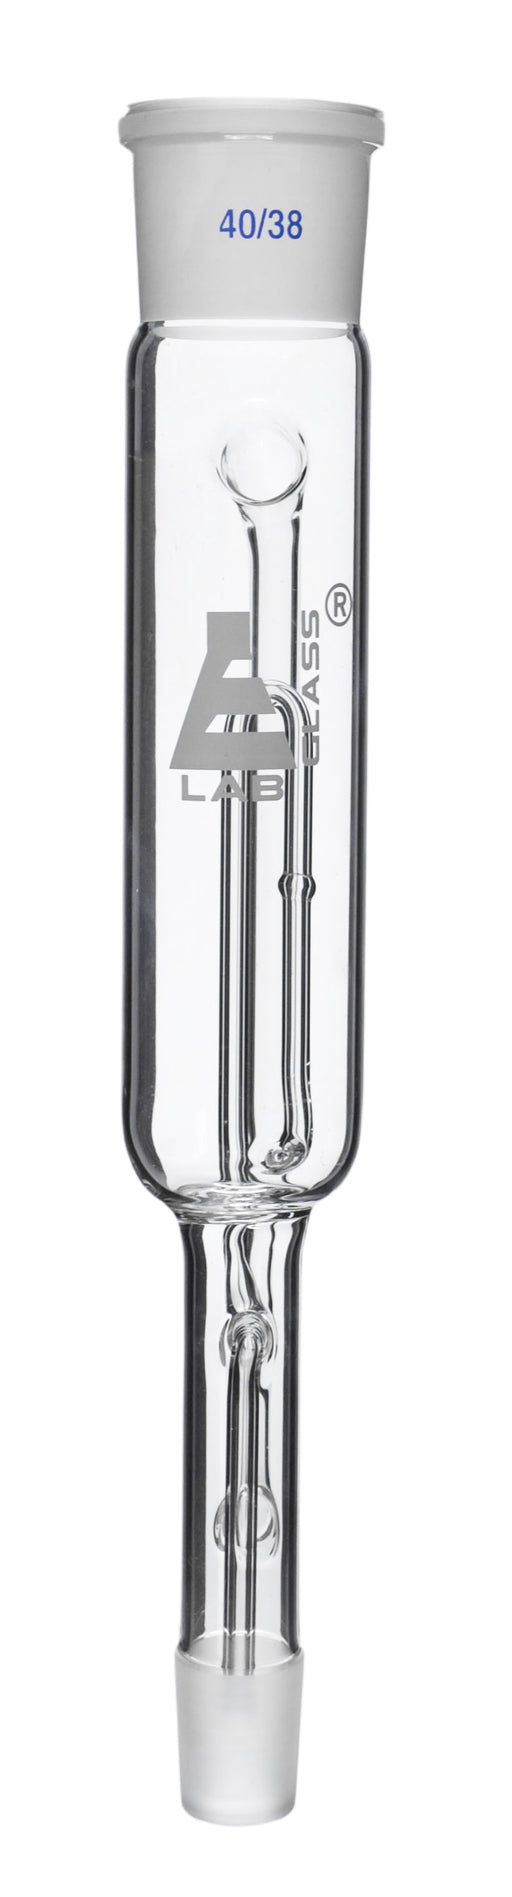 Extractor, 100ml Capacity, Socket Size 40/38, Cone Size 24/29, Spare Part for Soxhlet Extraction Apparatus, Borosilicate Glass - Eisco Labs